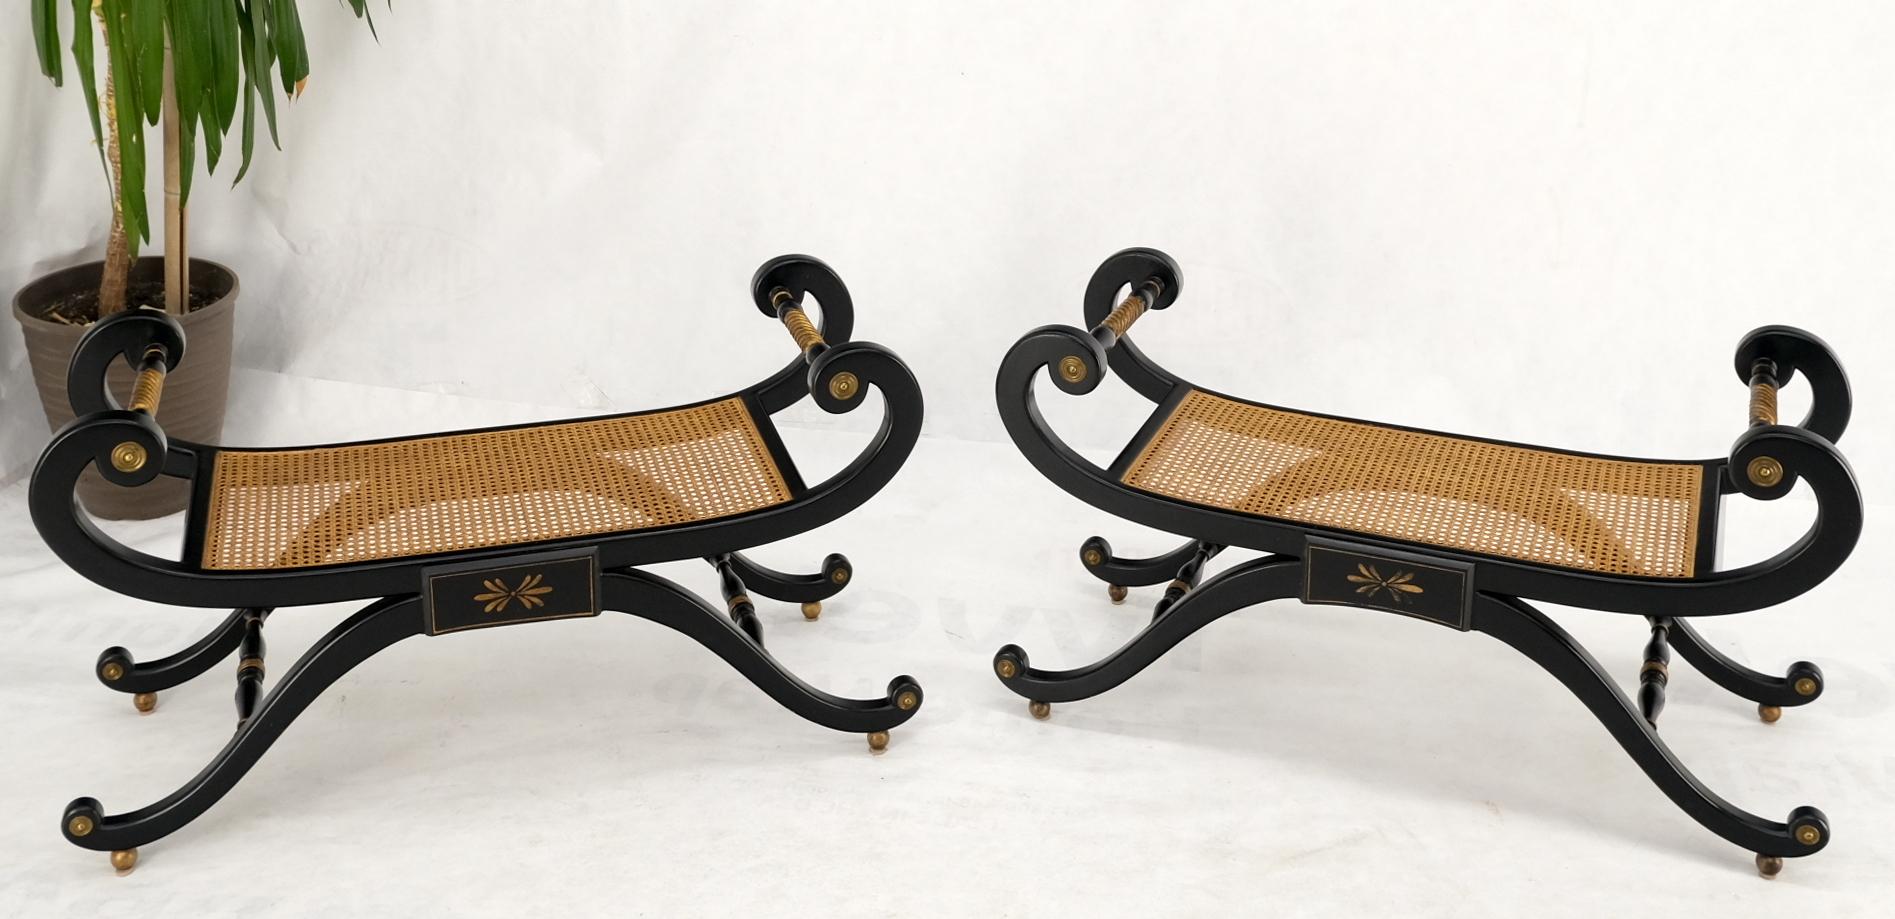 Pair of ebonized finish cane seat wide slayed ball points legs benches.
Gold gilt carved twisted rope side hand rails.